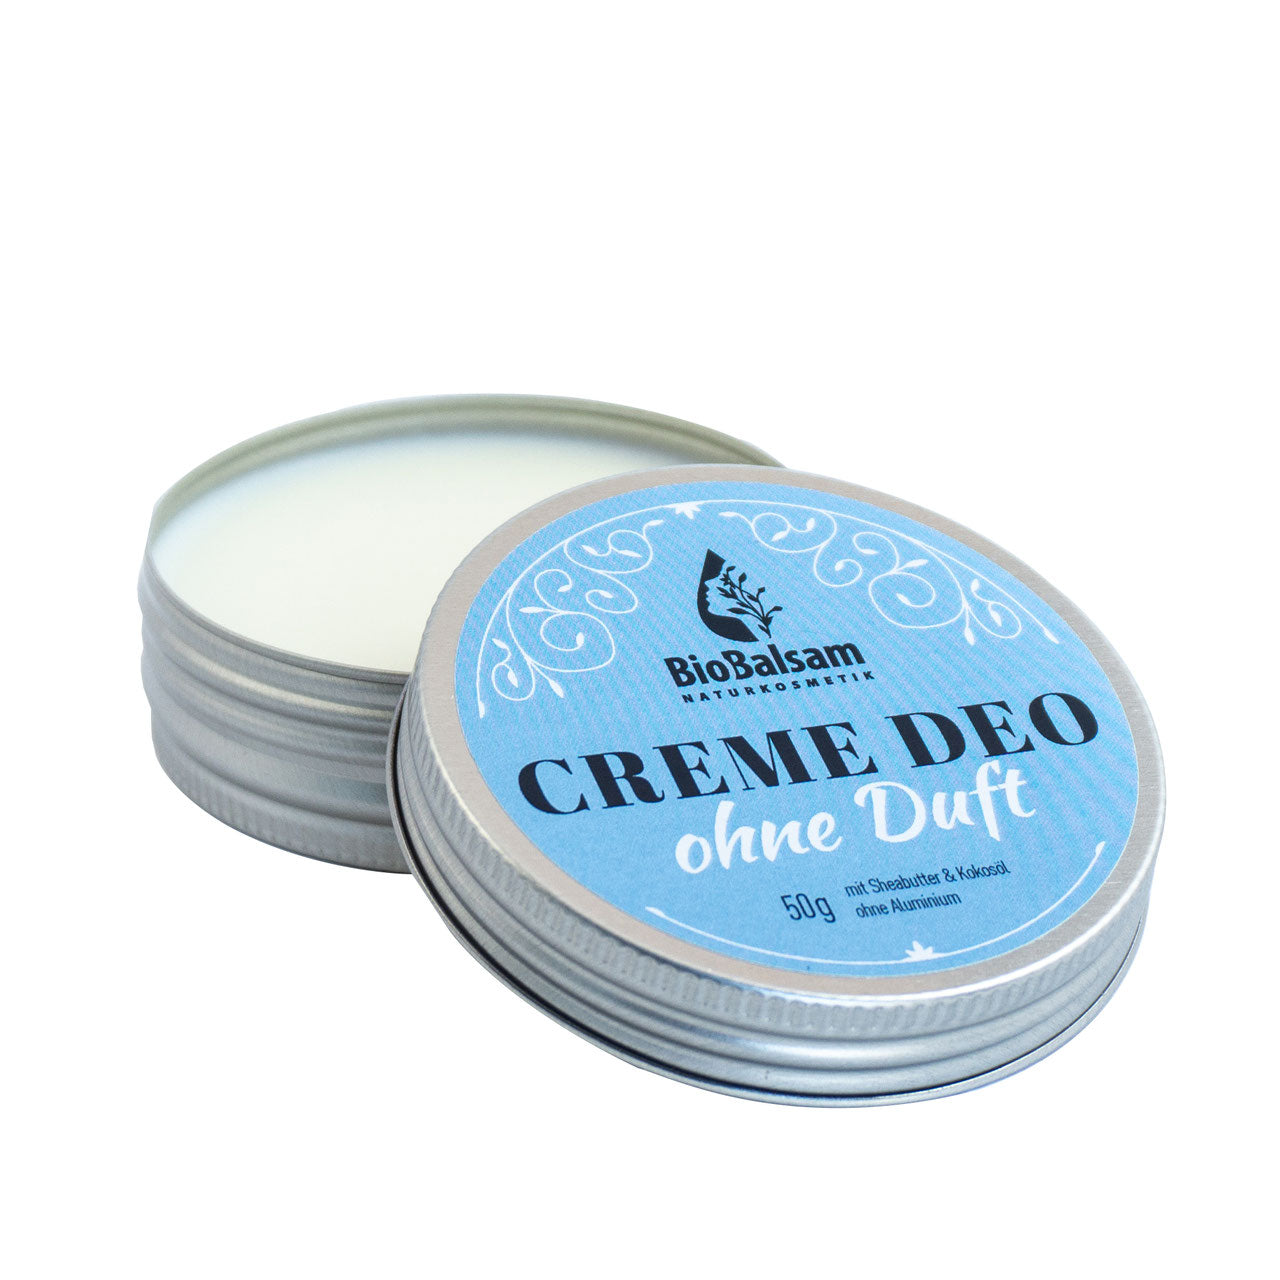 BioBalsam Creme Deo ohne Duft